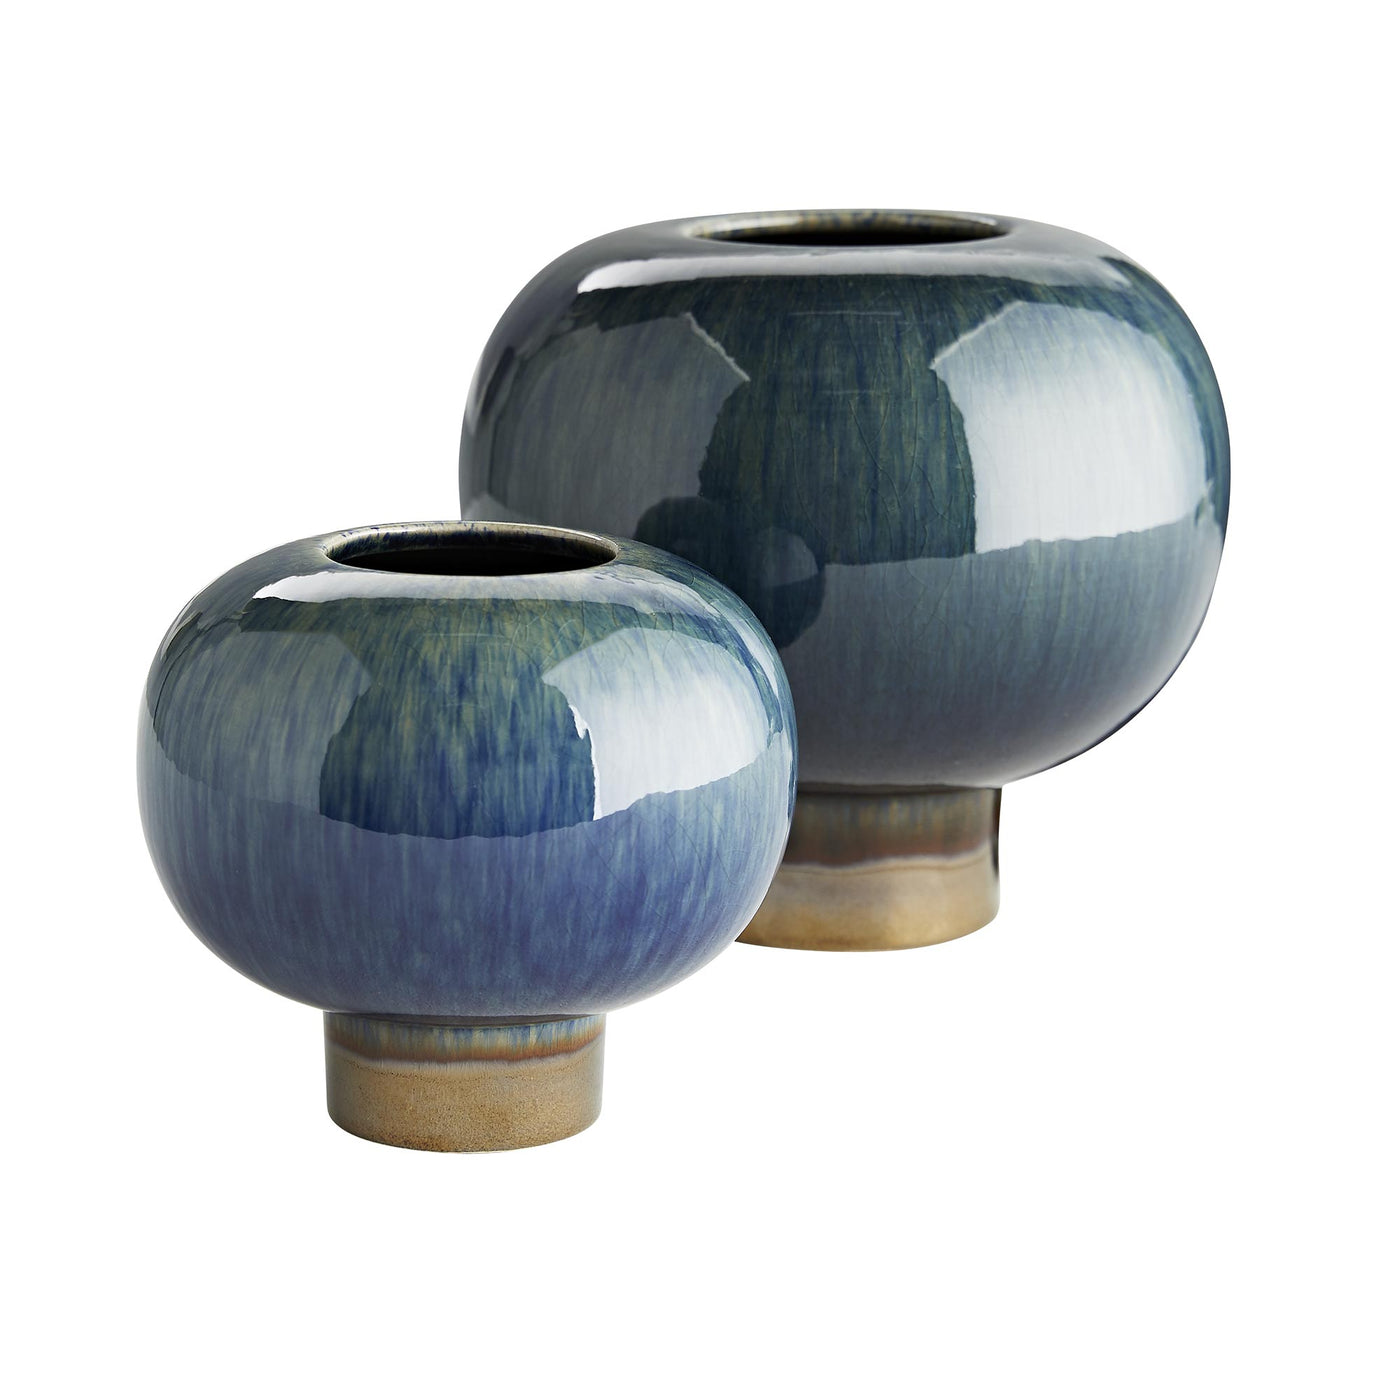 VASE ROUNDED PEACOCK (Available in 2 Sizes)